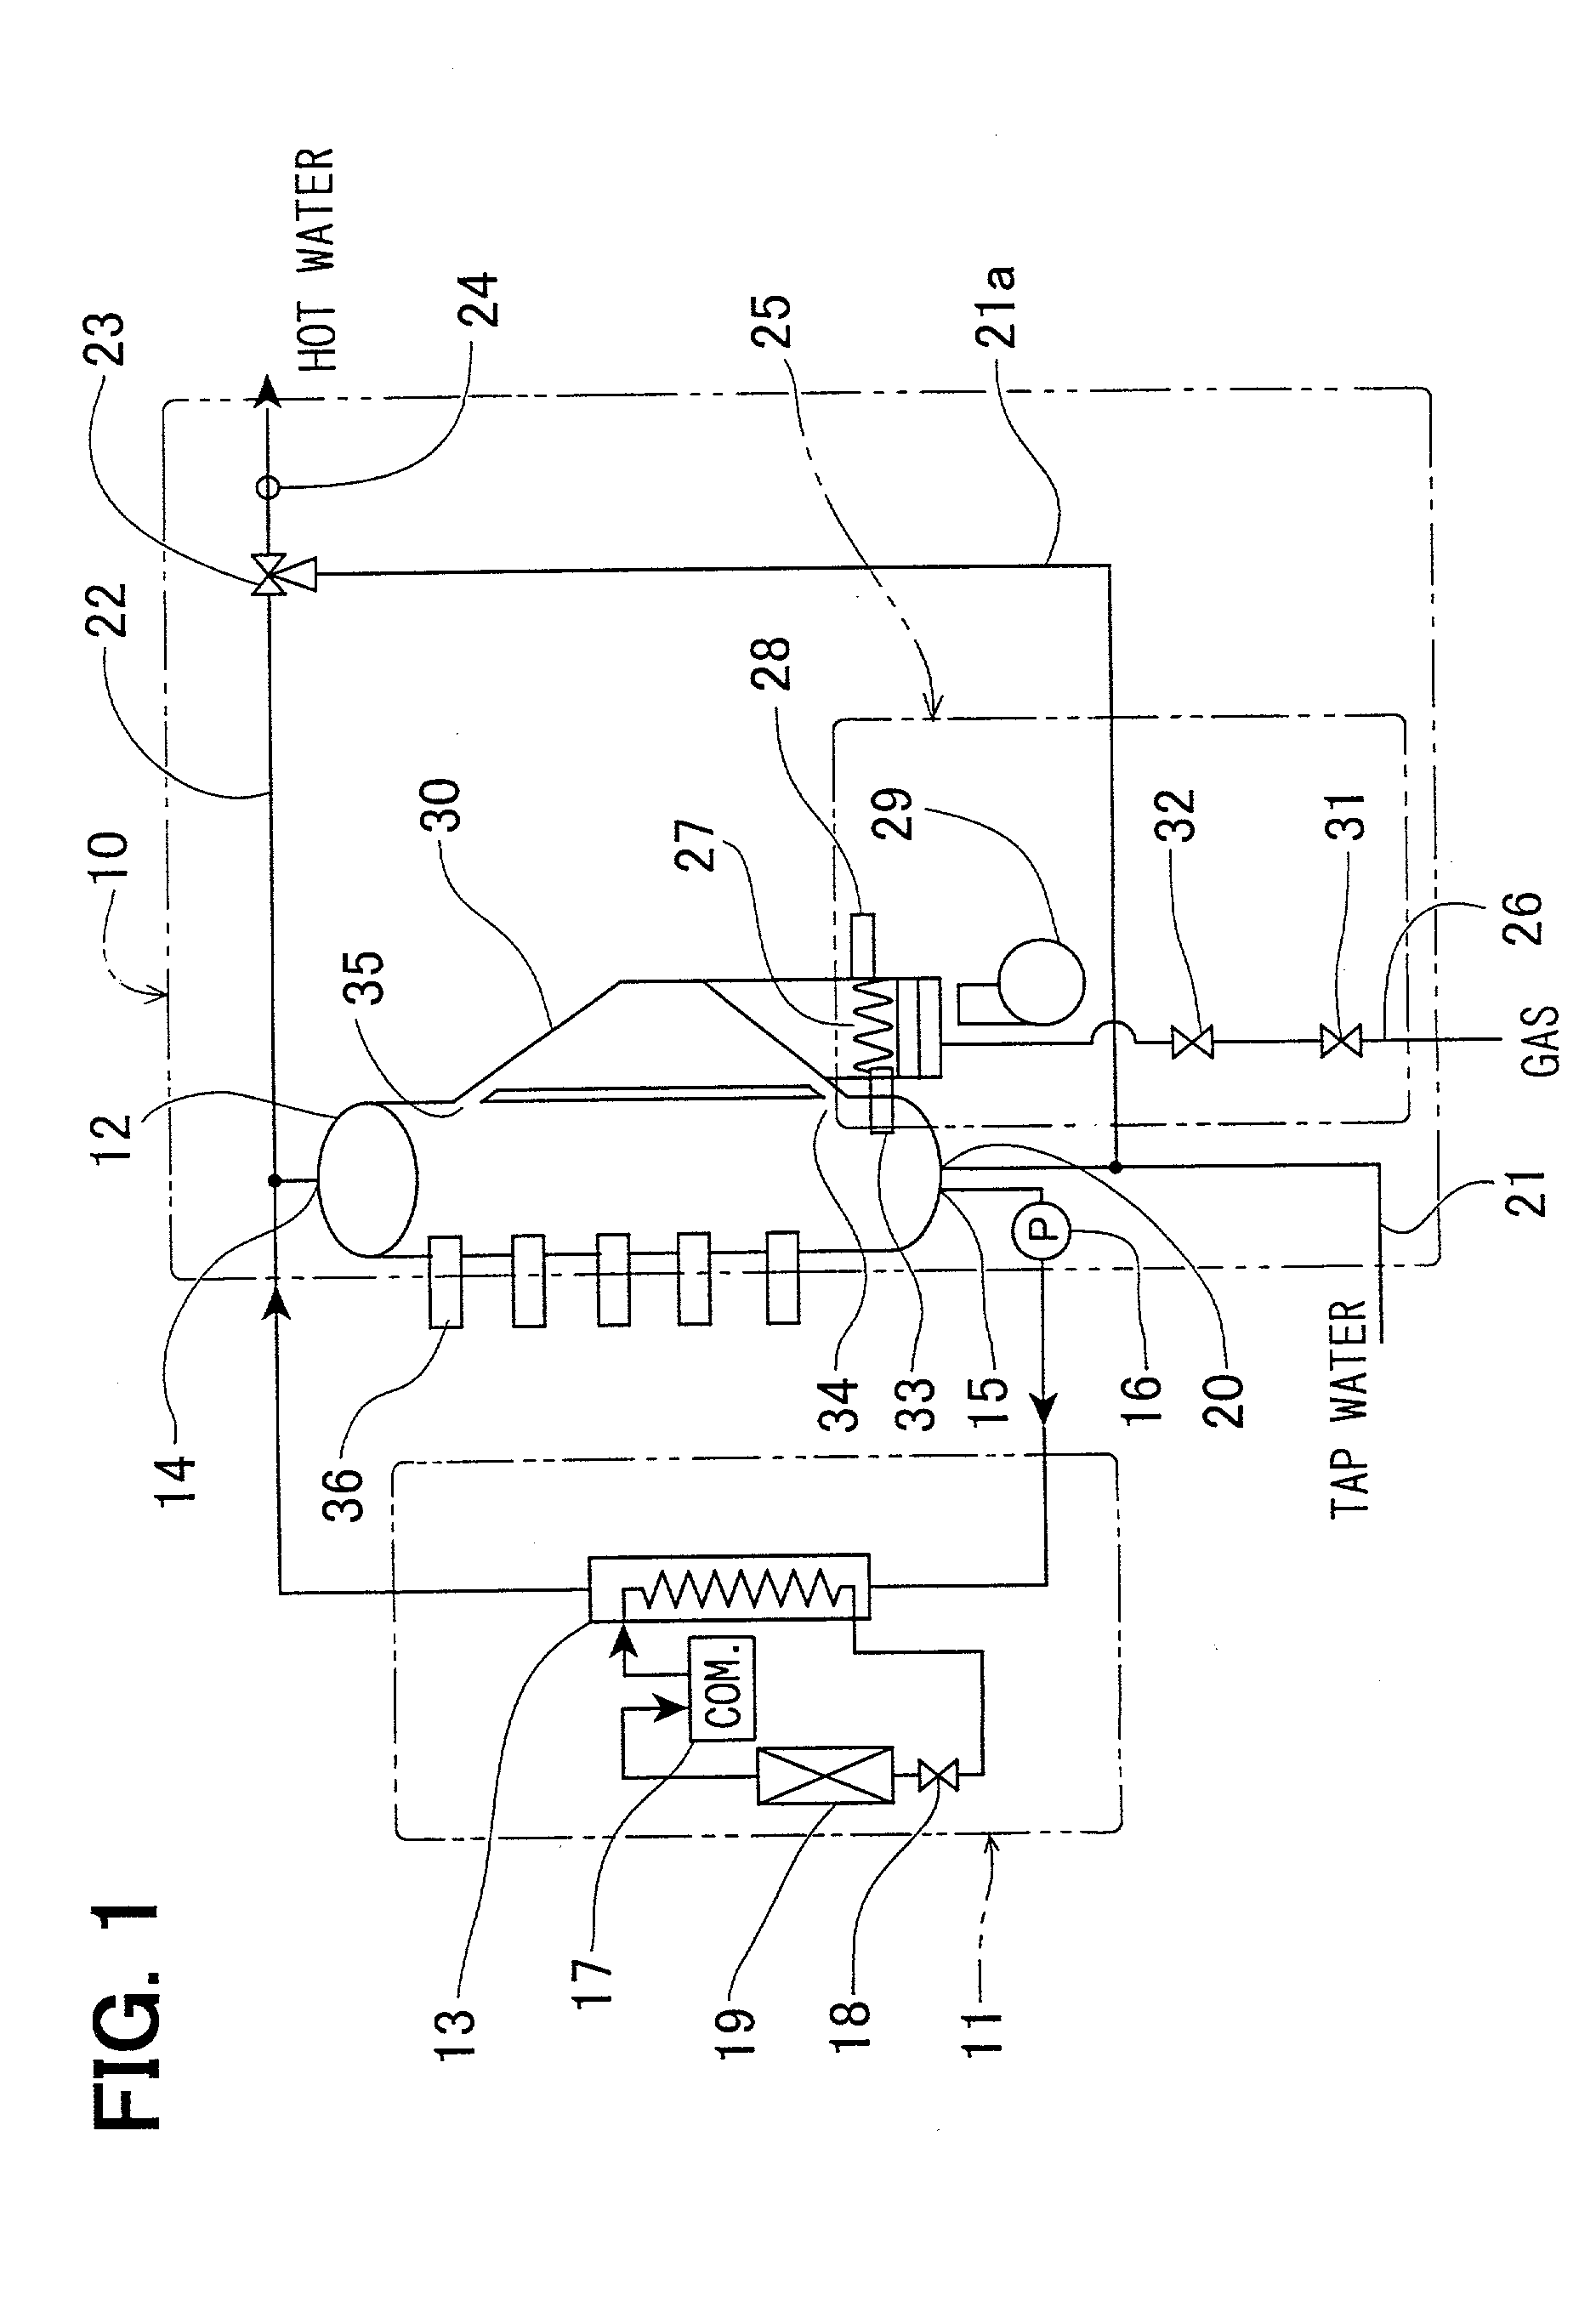 Hybrid water heater with electrical heating unit and combustor